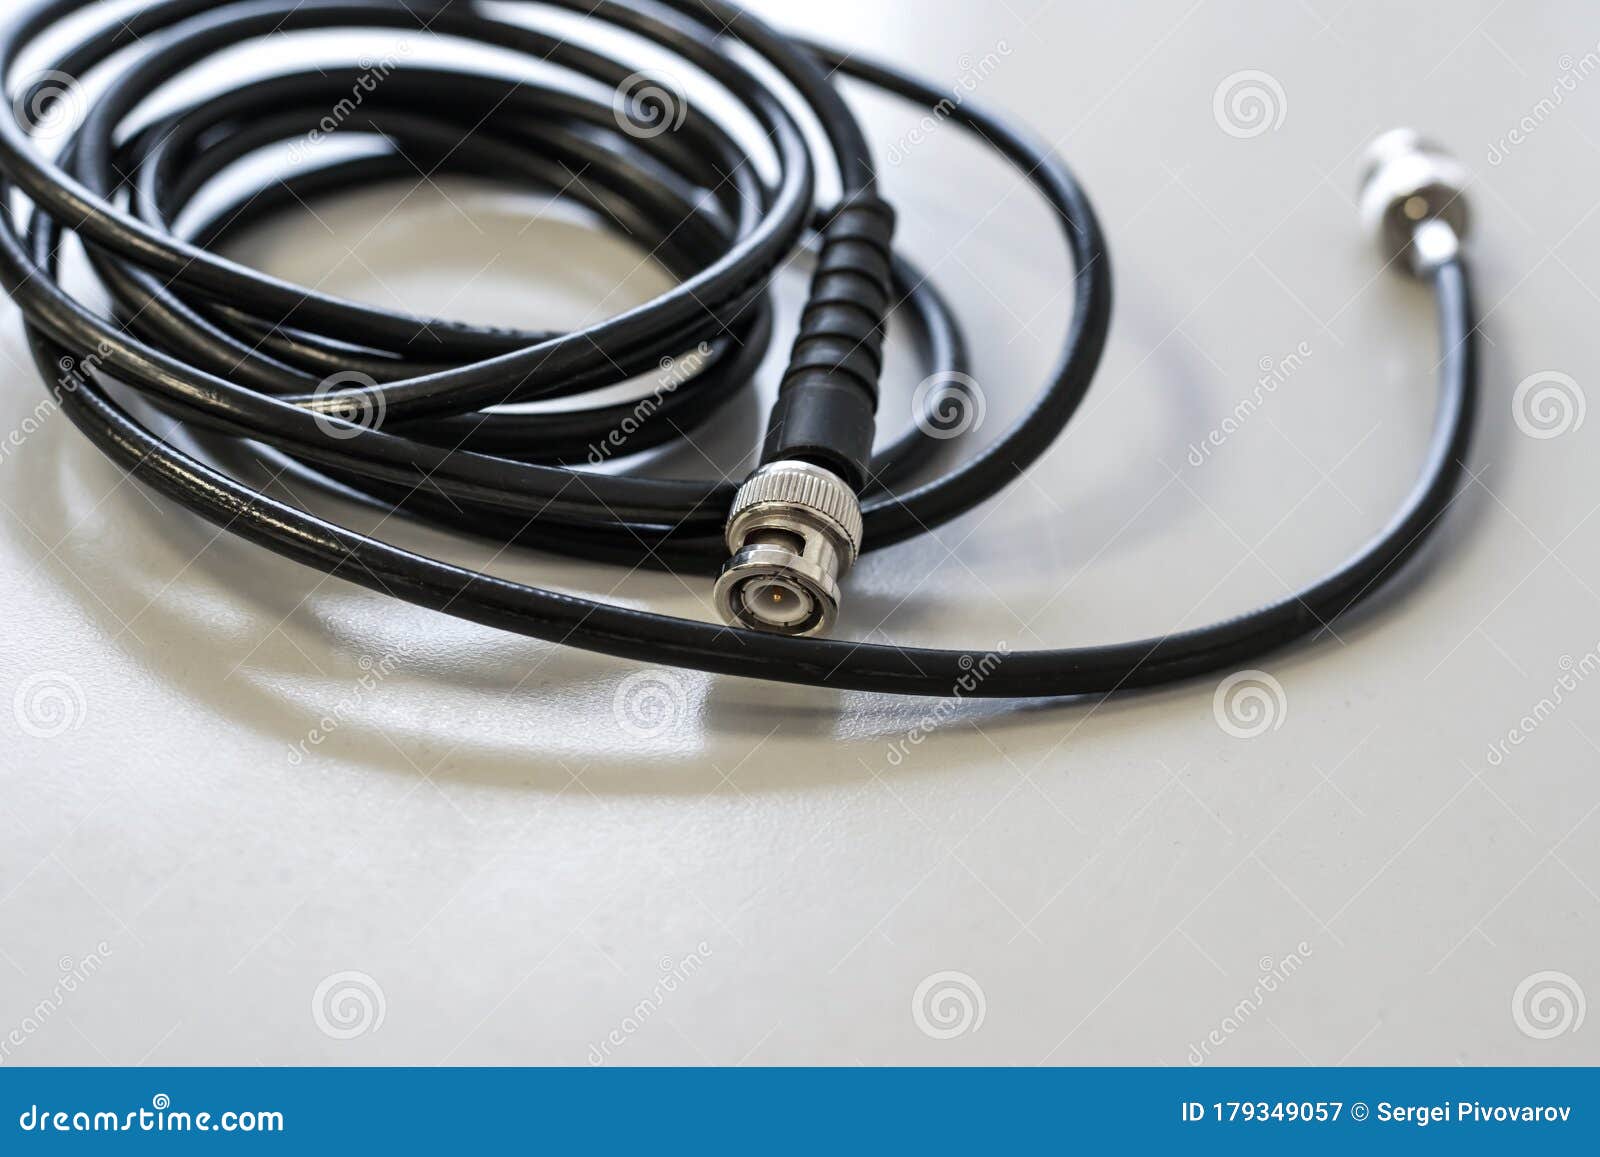 cable for the transmission of television signal, coaxial cable television